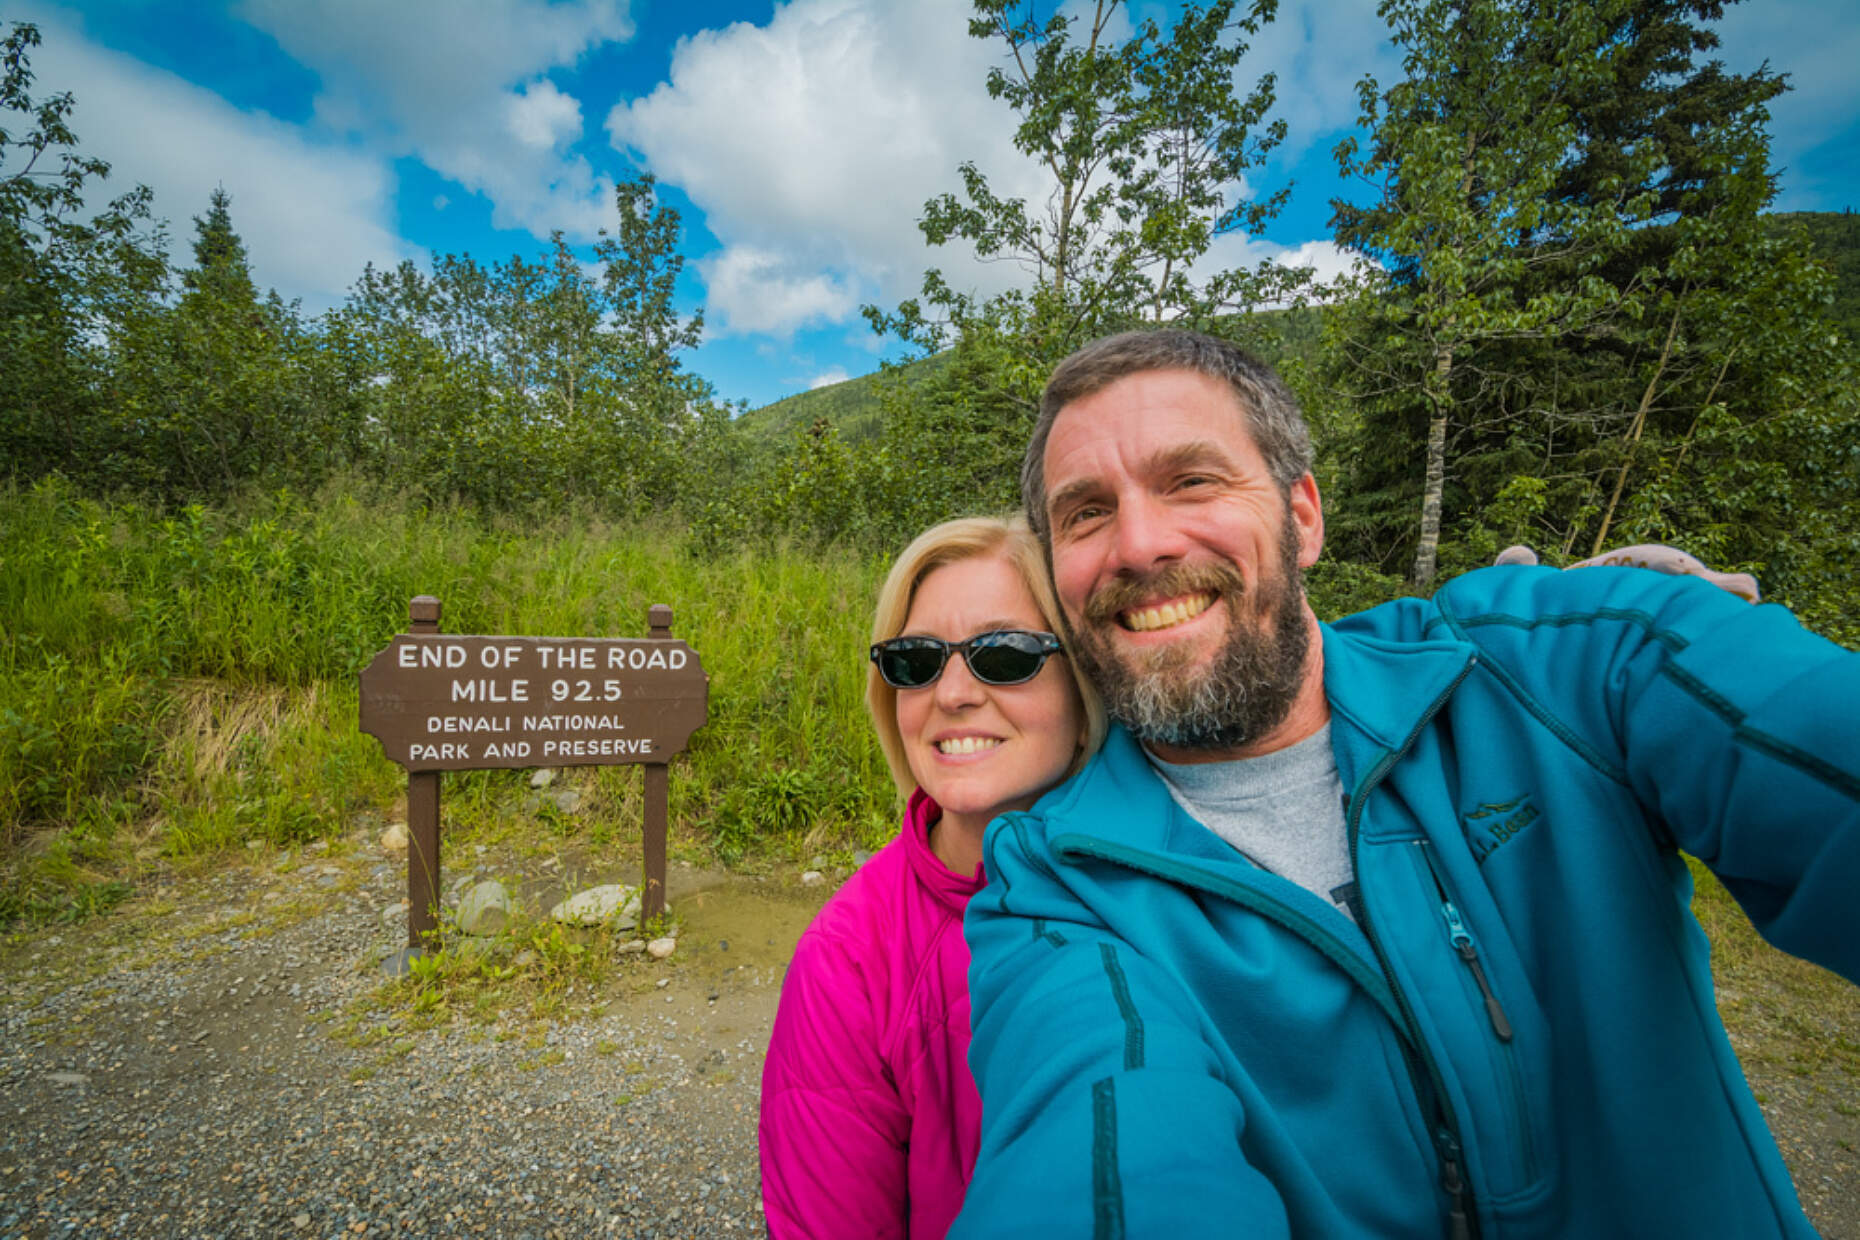 Mary Beth and Scott Adams at the "End of the Road"